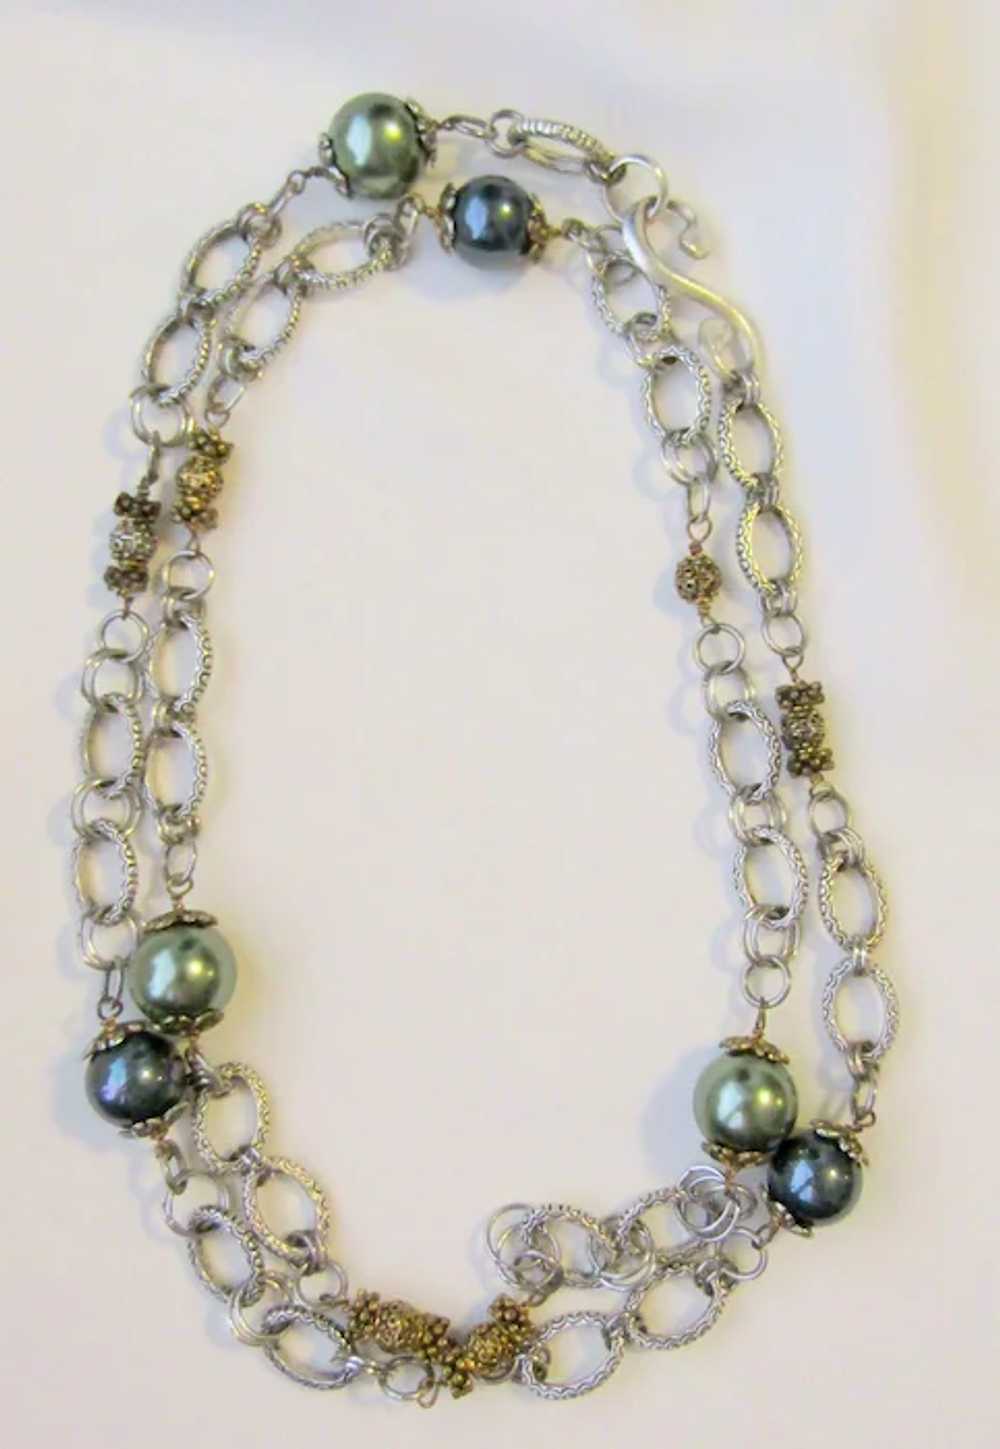 Vintage Faux Gray Pearls Chain Necklace - image 4